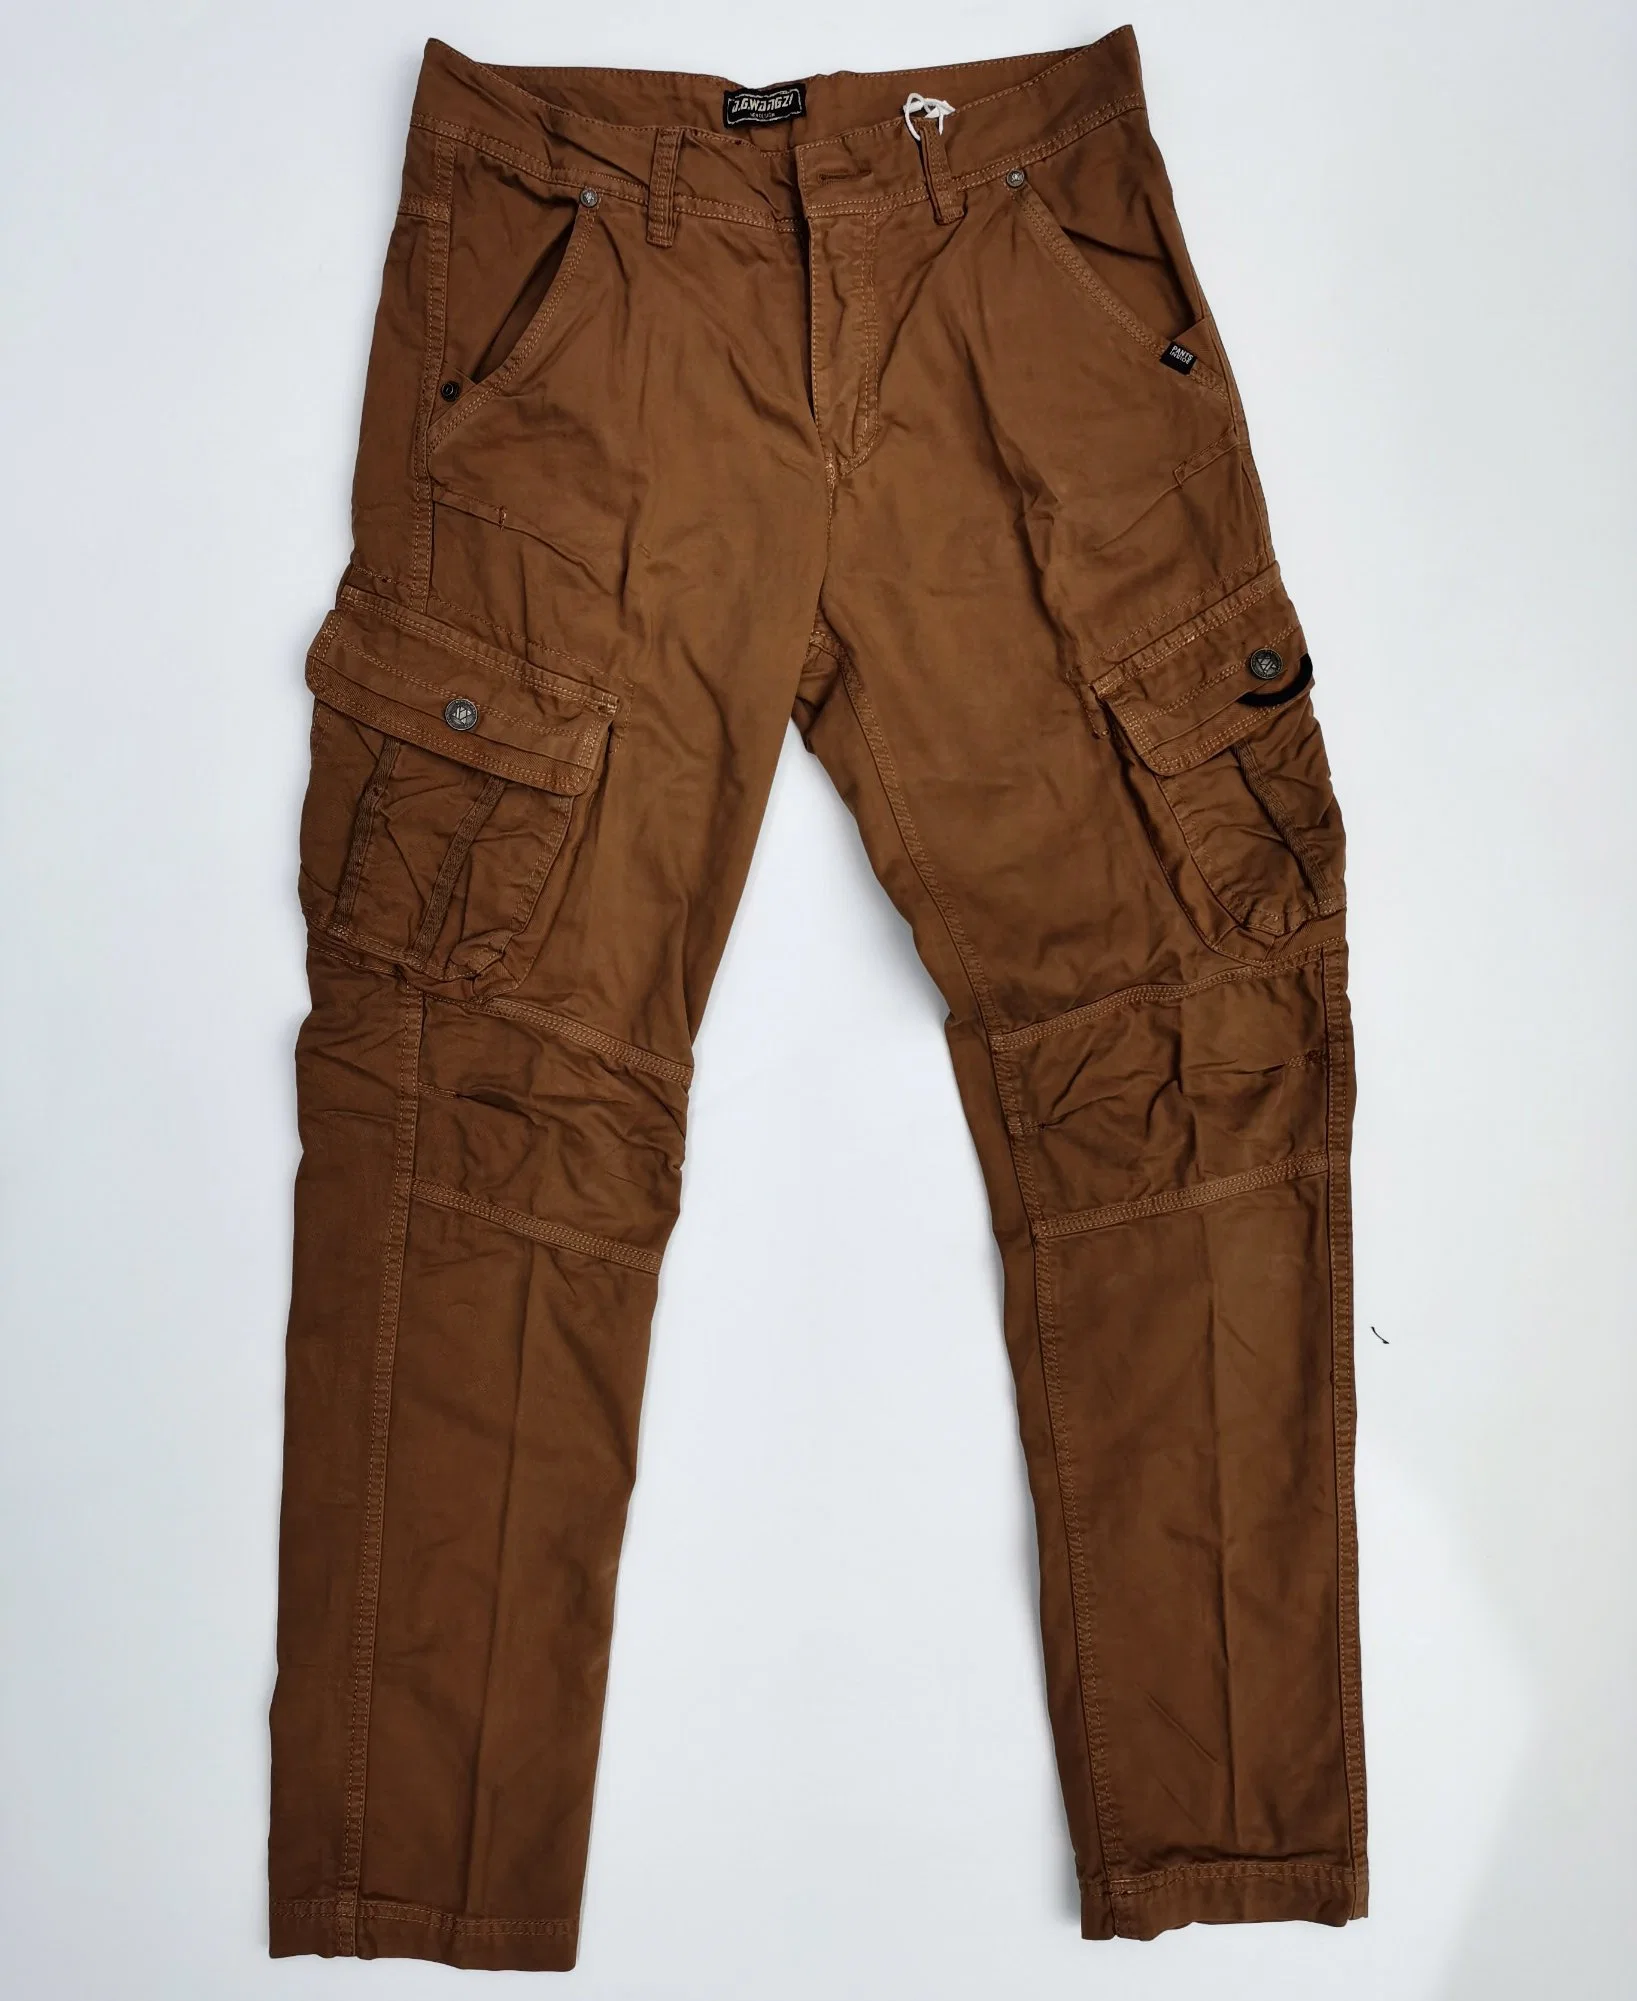 Men's Casual Safety Work Wear Stretch Multi-Cargo Pants